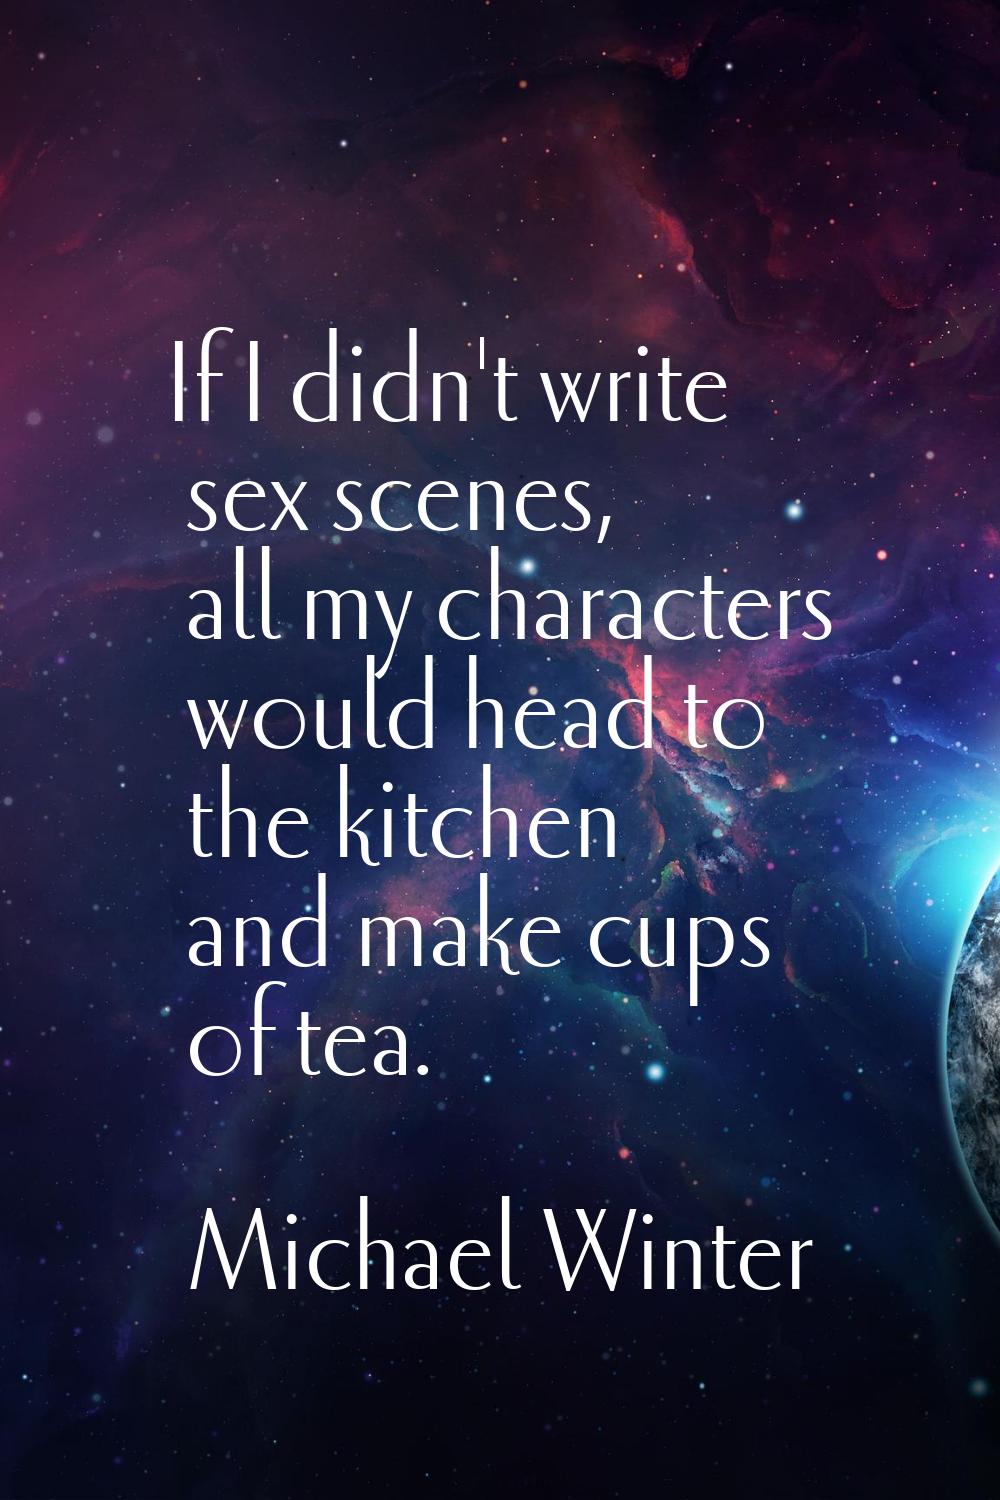 If I didn't write sex scenes, all my characters would head to the kitchen and make cups of tea.